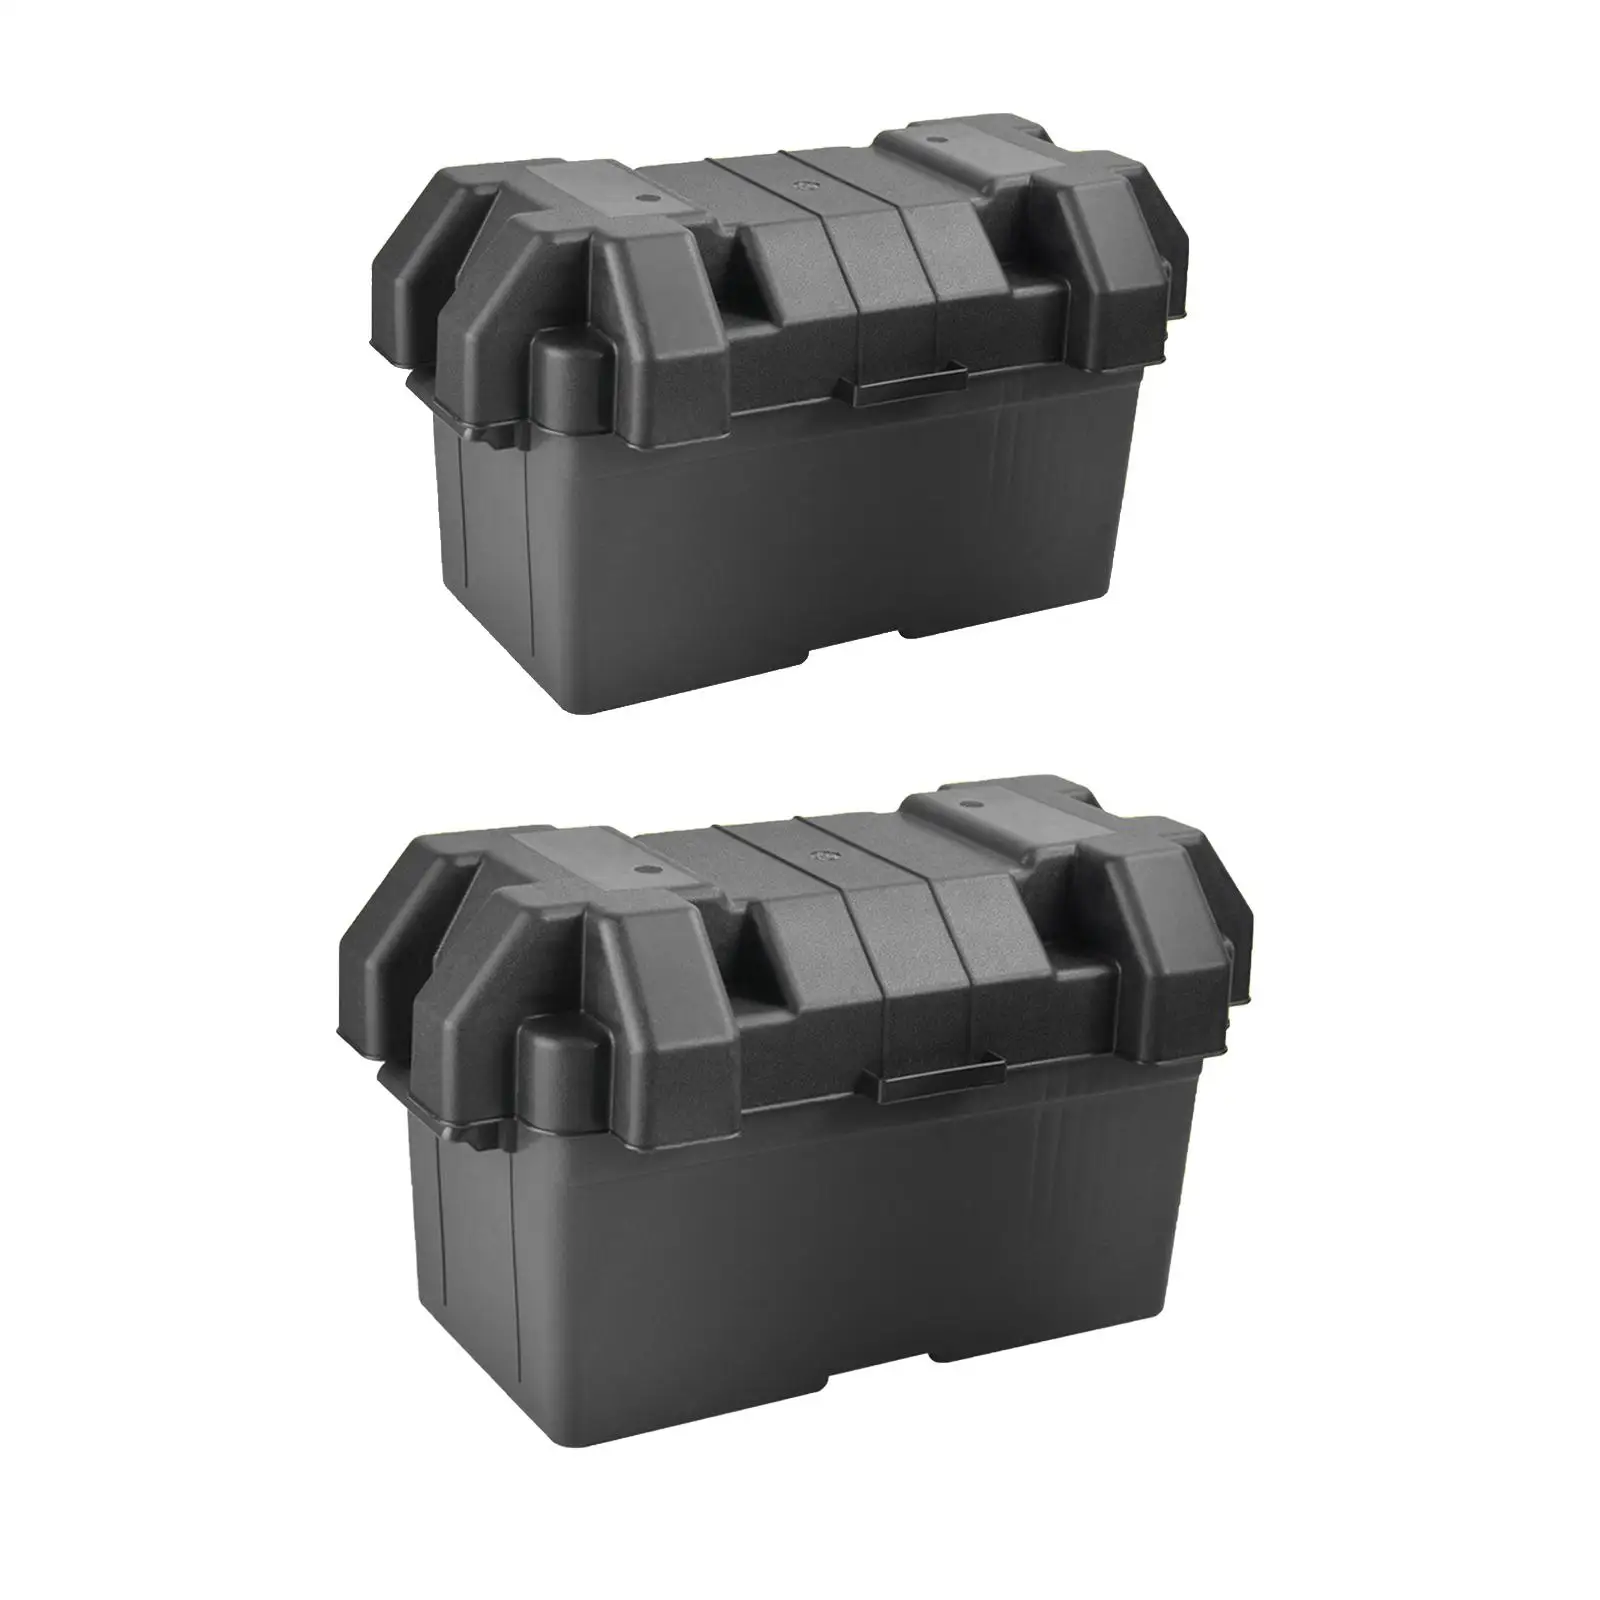 Battery Box Holder with Strap Multifunctional Portable Waterproof Battery Tray Cases for Camper Boat RV Automotive Travel